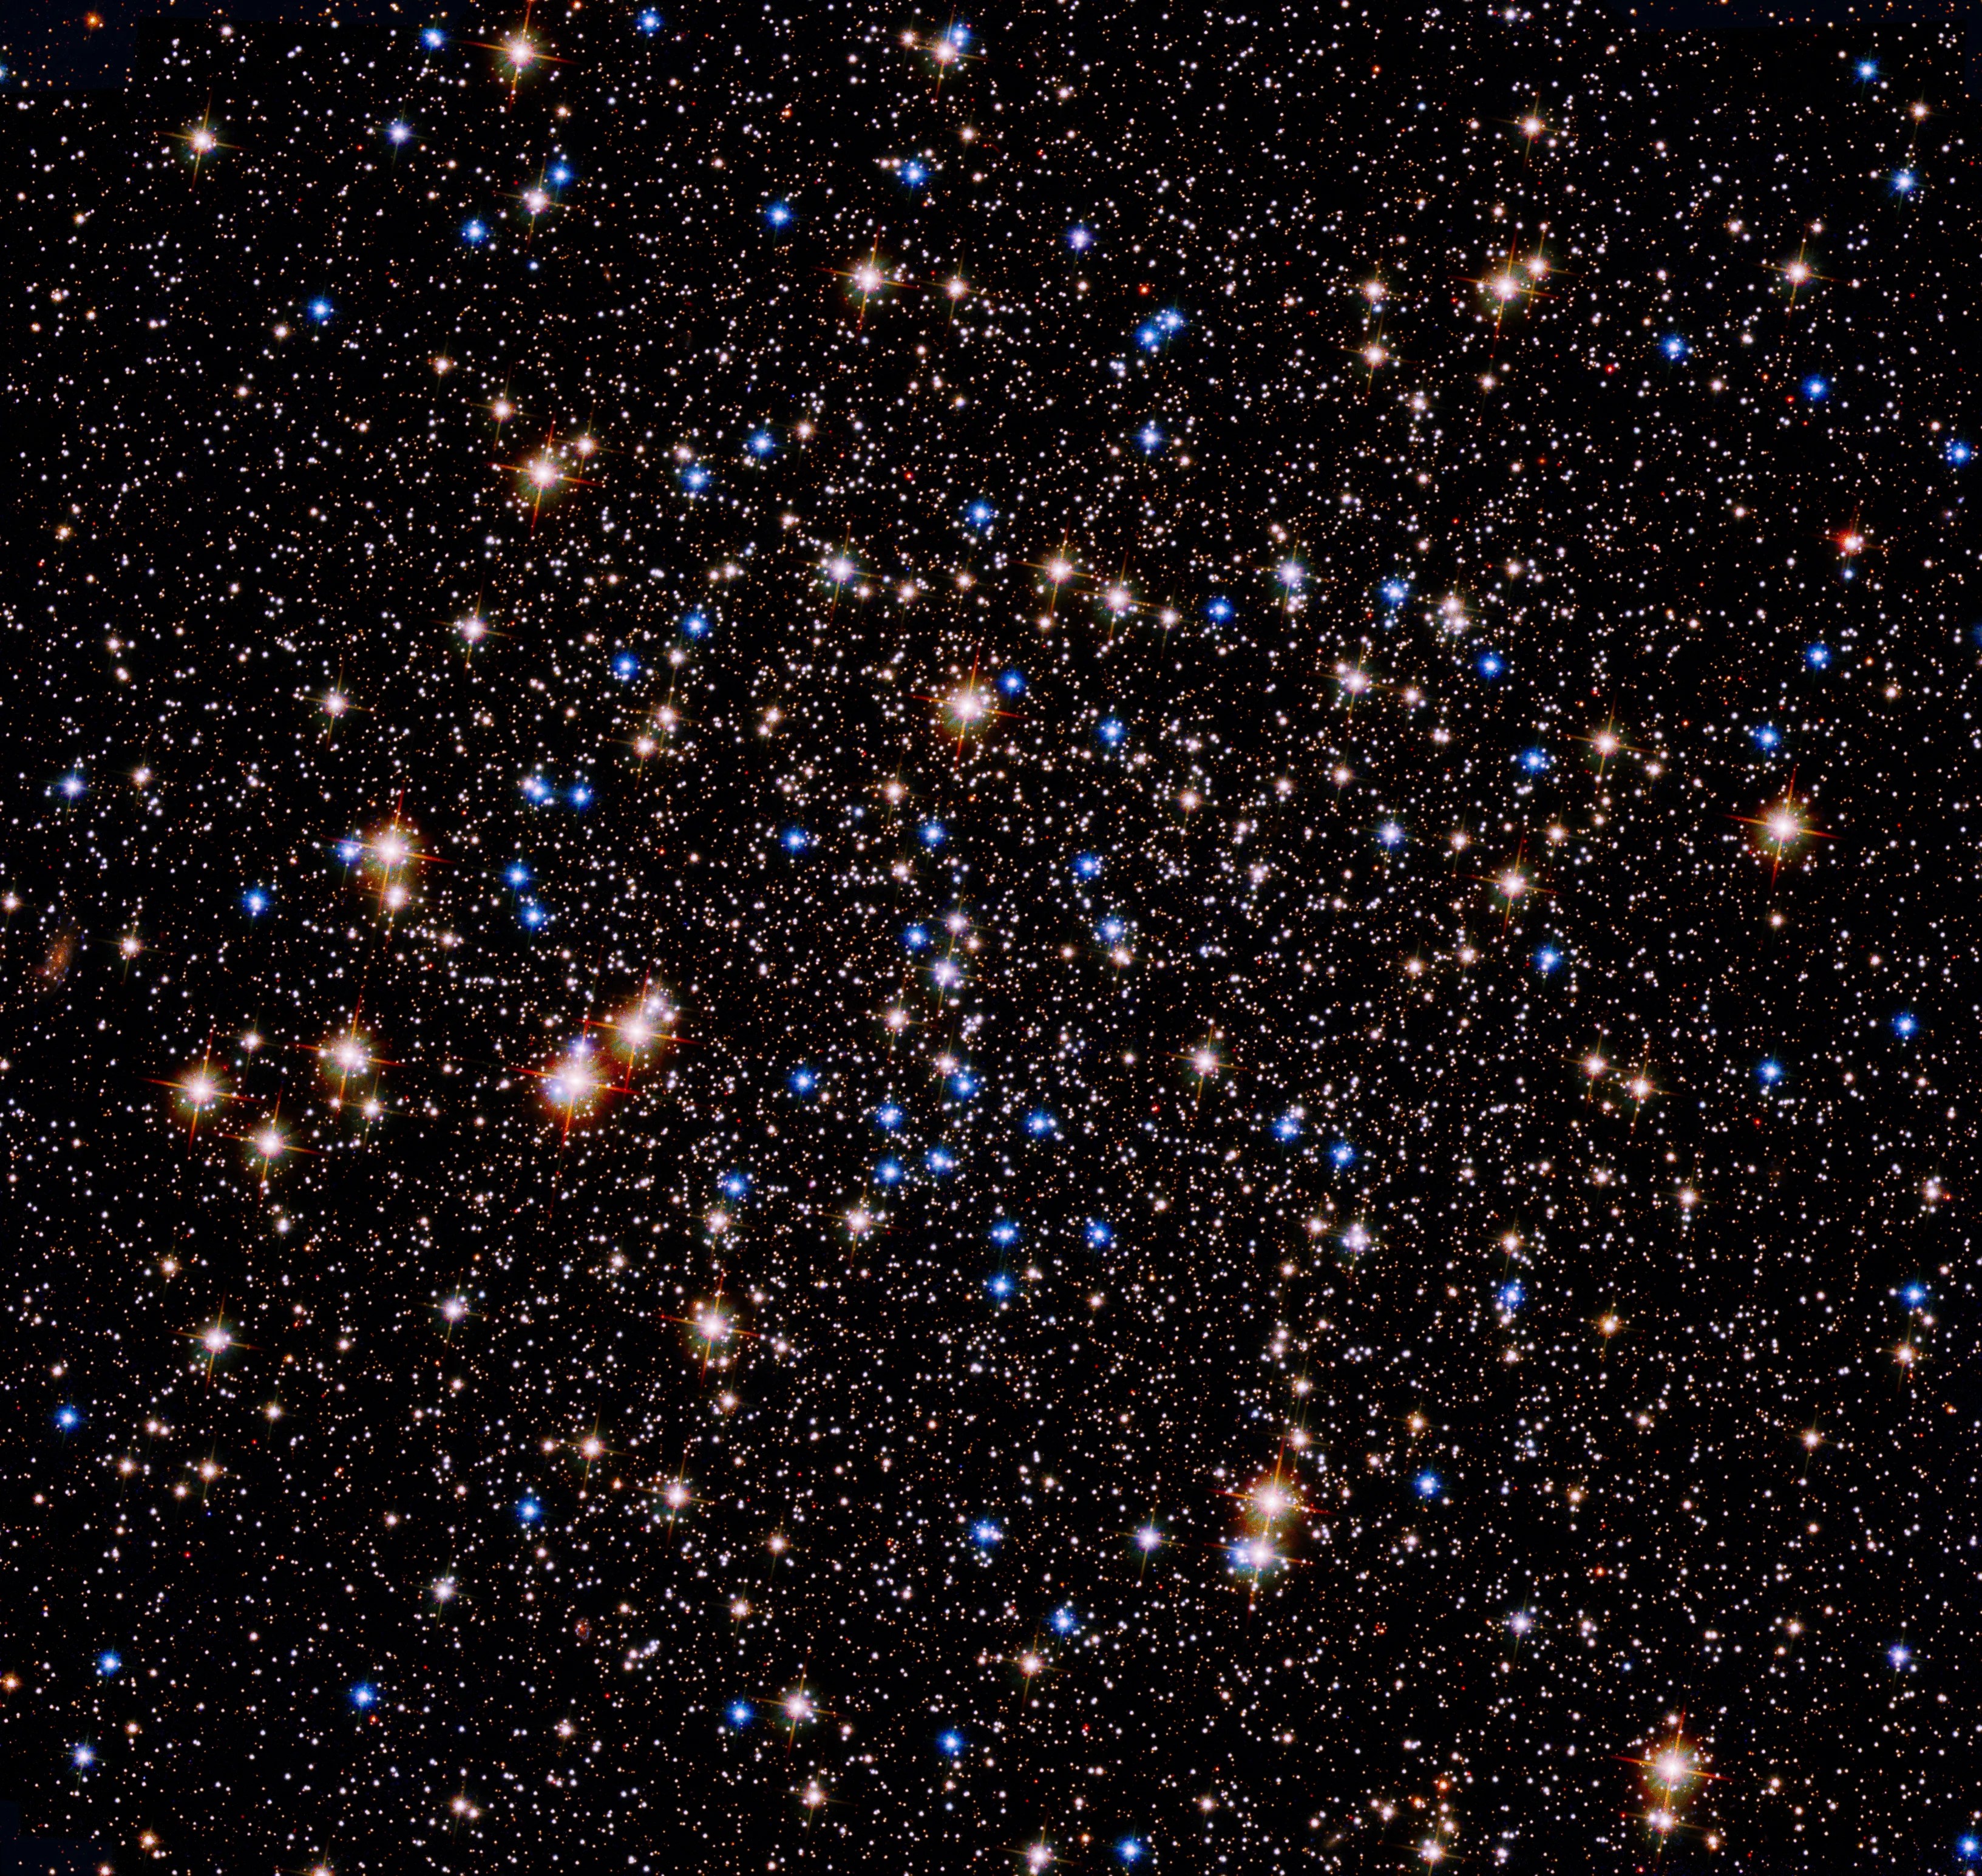 A grouping of blue and reddish stars against the black background of space.